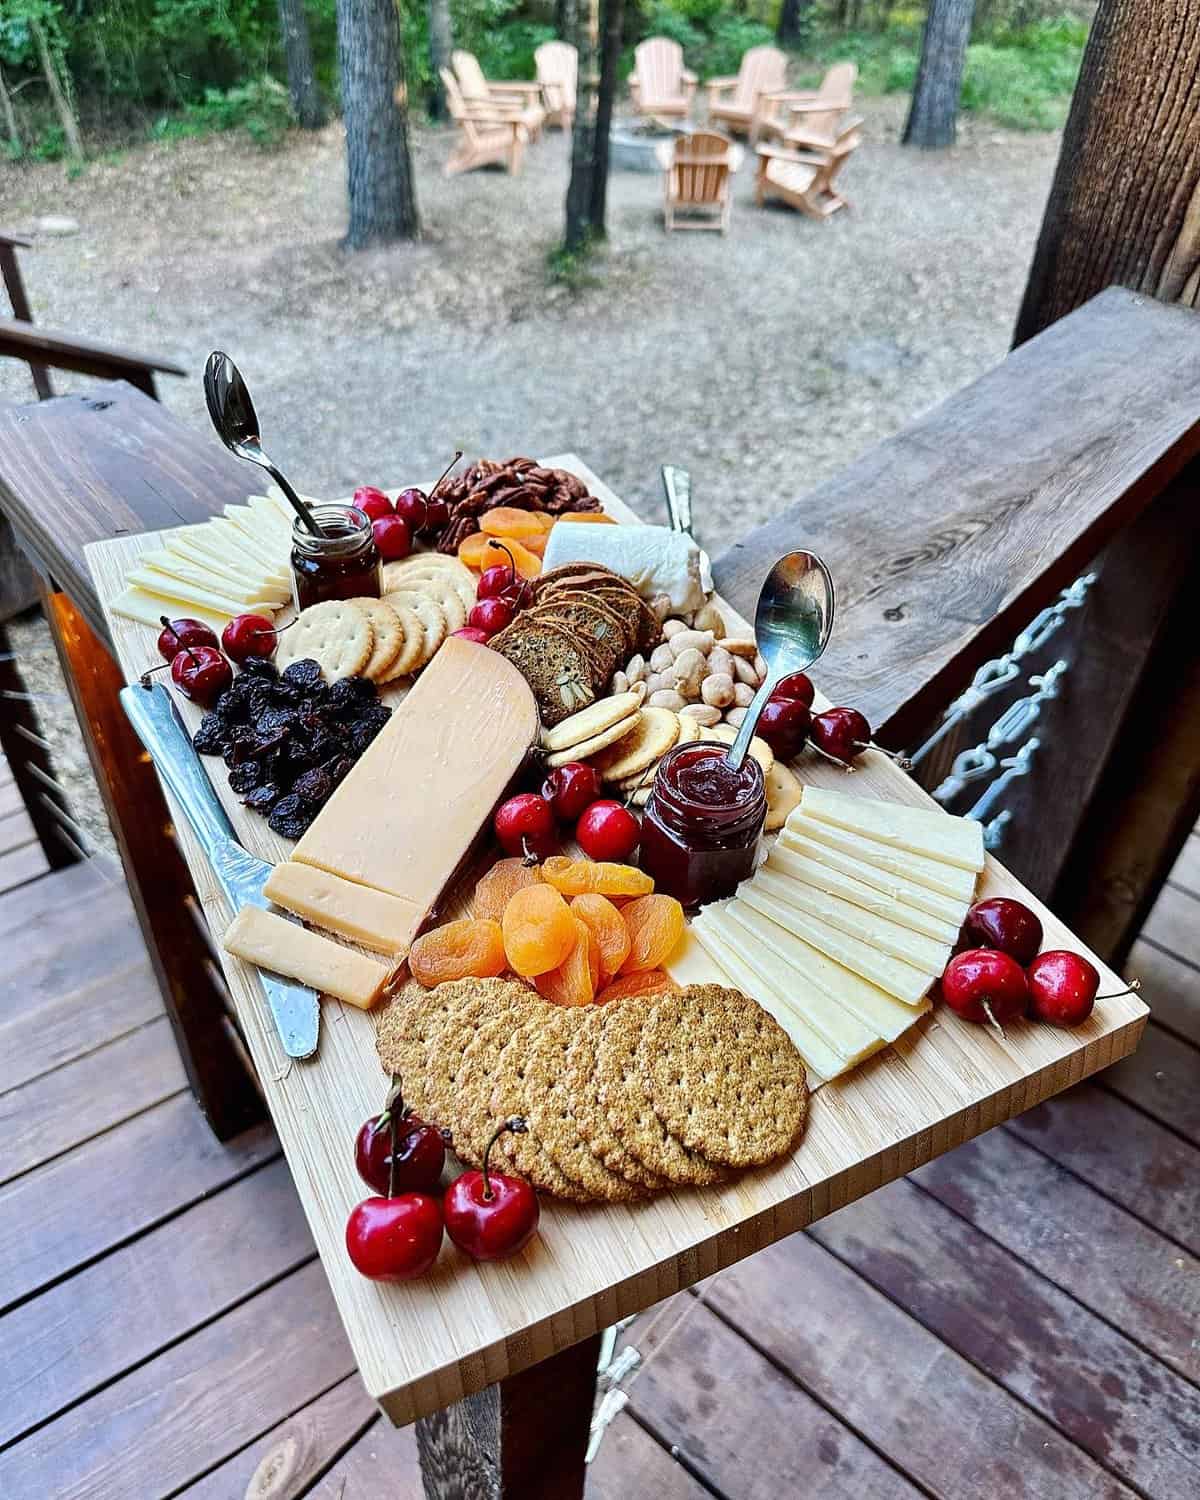 A cheese board with fruit and nuts.